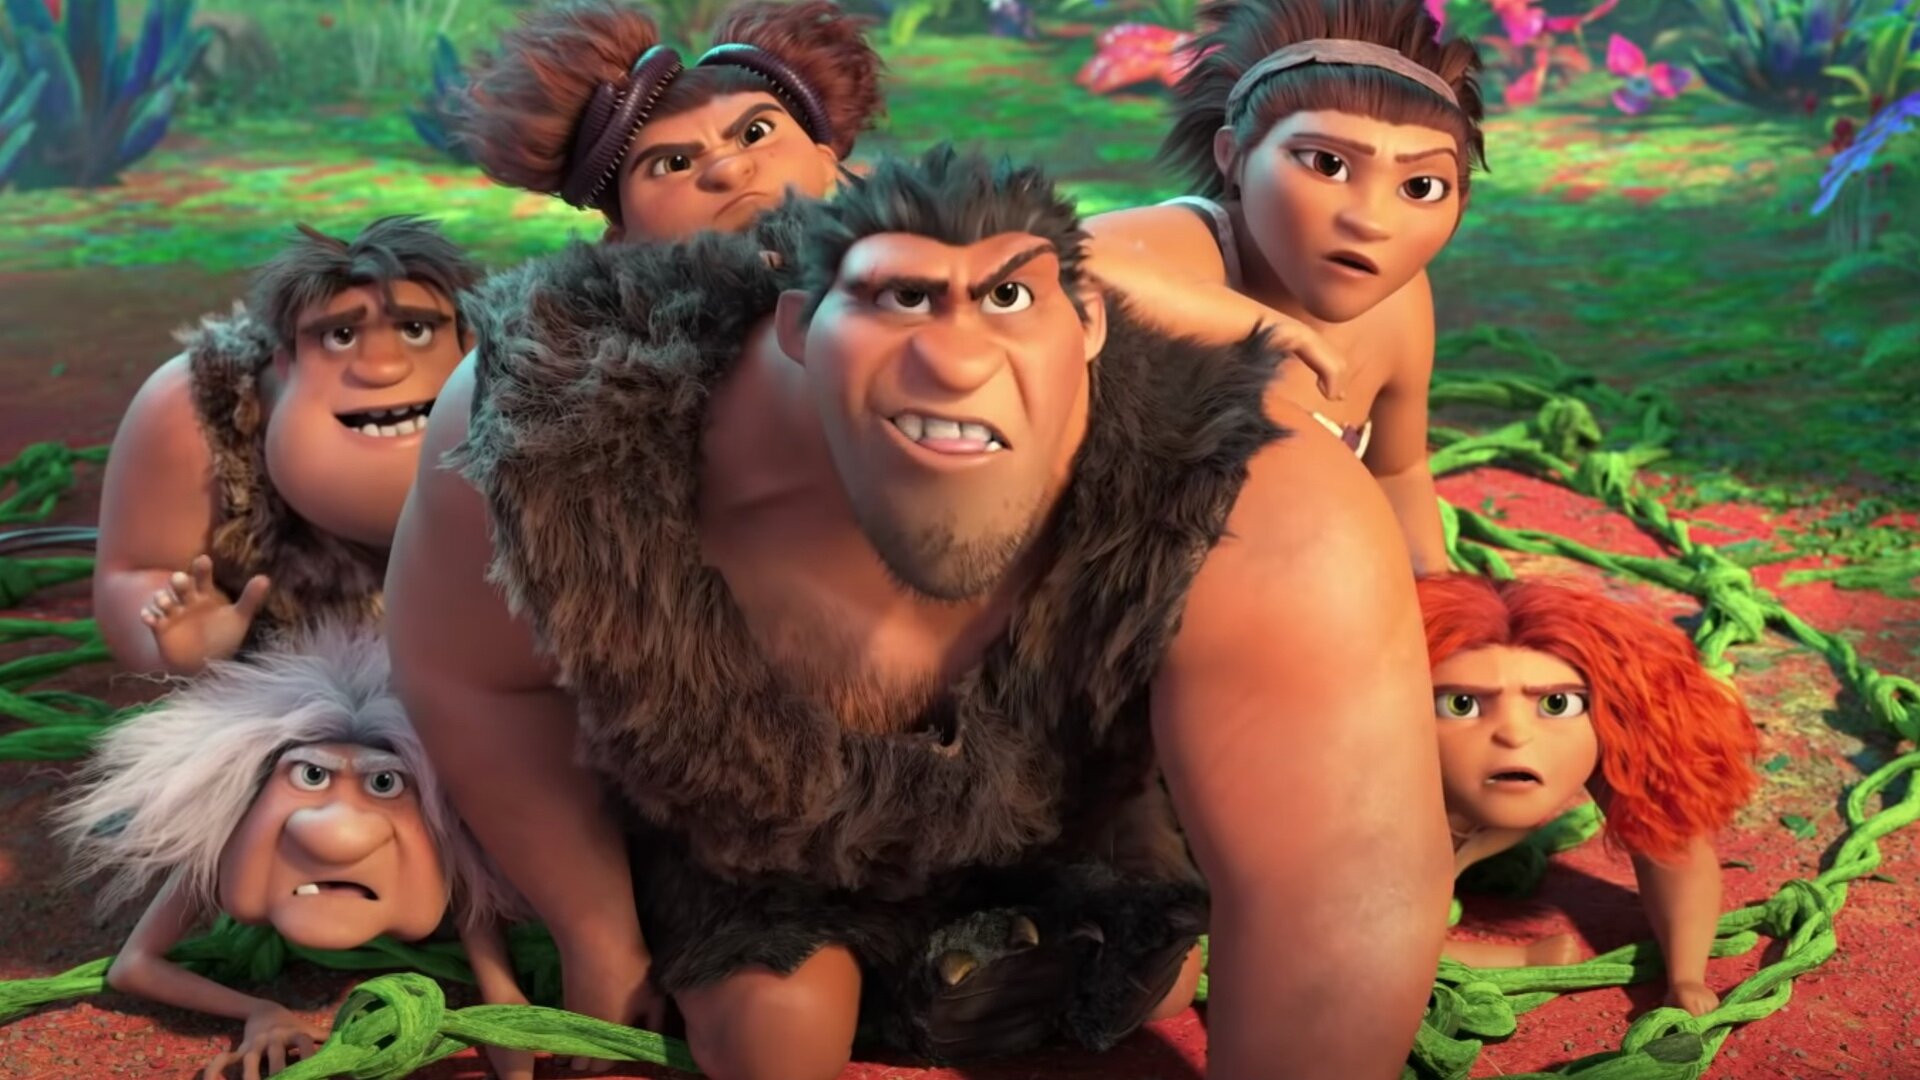 The Croods Are Back For A New Prehistoric Adventure In Trailer For The Croo...